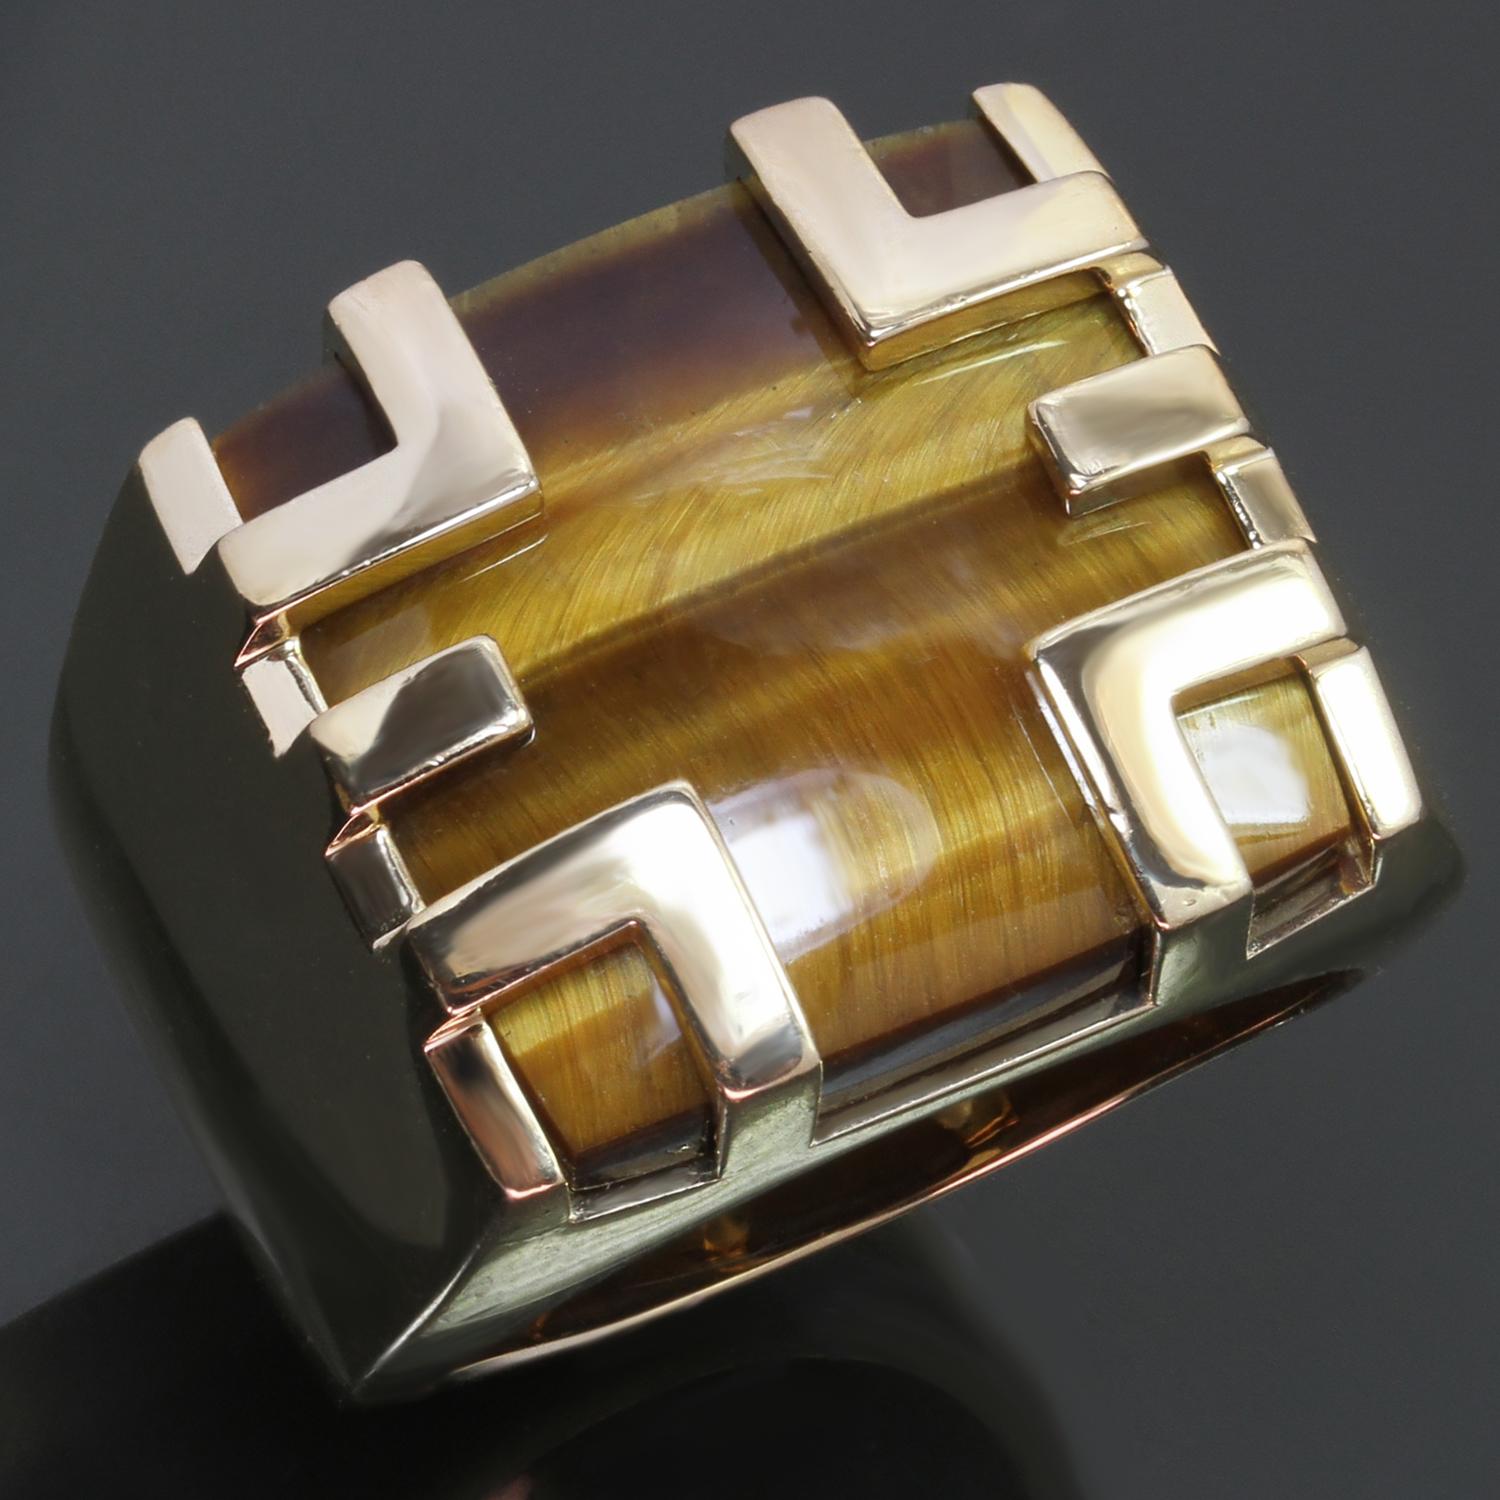 This exquisite vintage authentic Cartier cage ring from the classic Le Baiser Du Dragon is crafted in 18k yellow gold and set with a cushion-cut Tiger's Eye. Signed Cartier 750 and numbered. Made in France circa 1970s. Measurements: 0.78